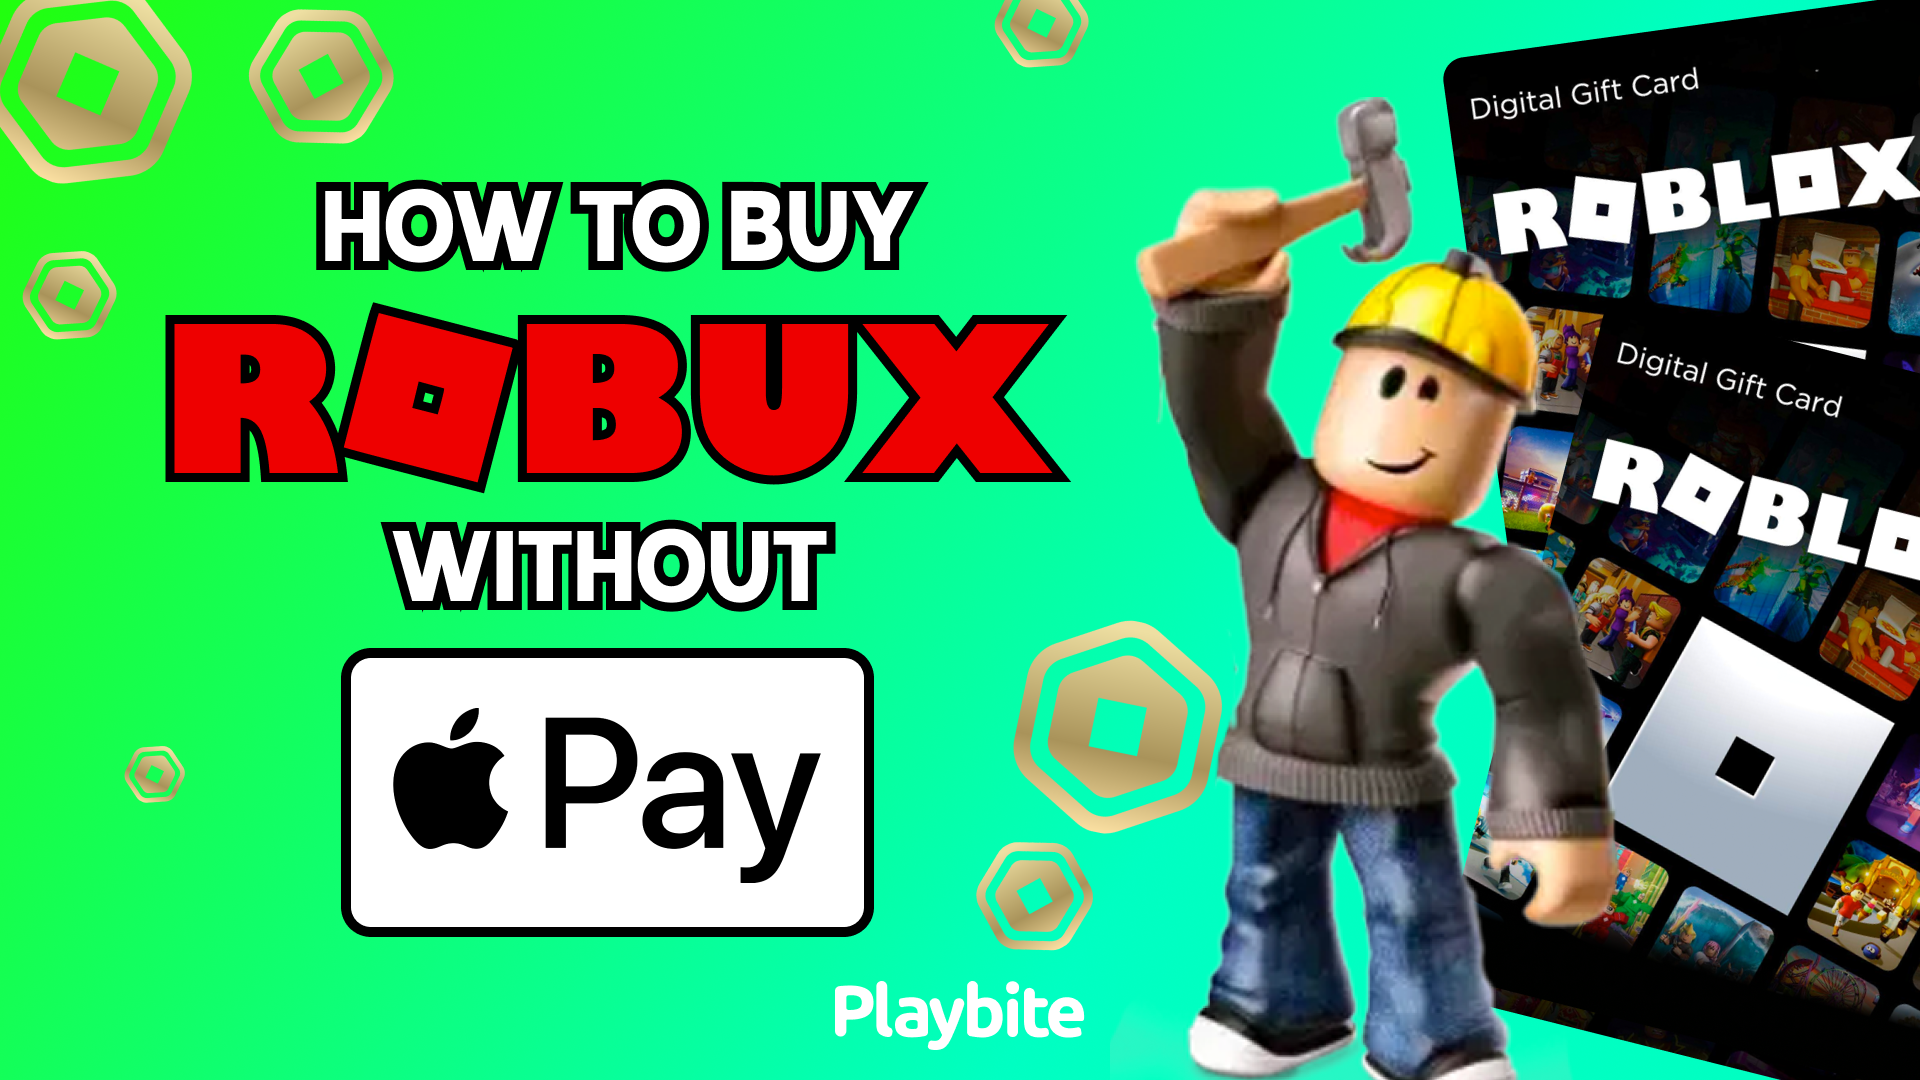 How to get robux on roblox without buying and be popular on roblox